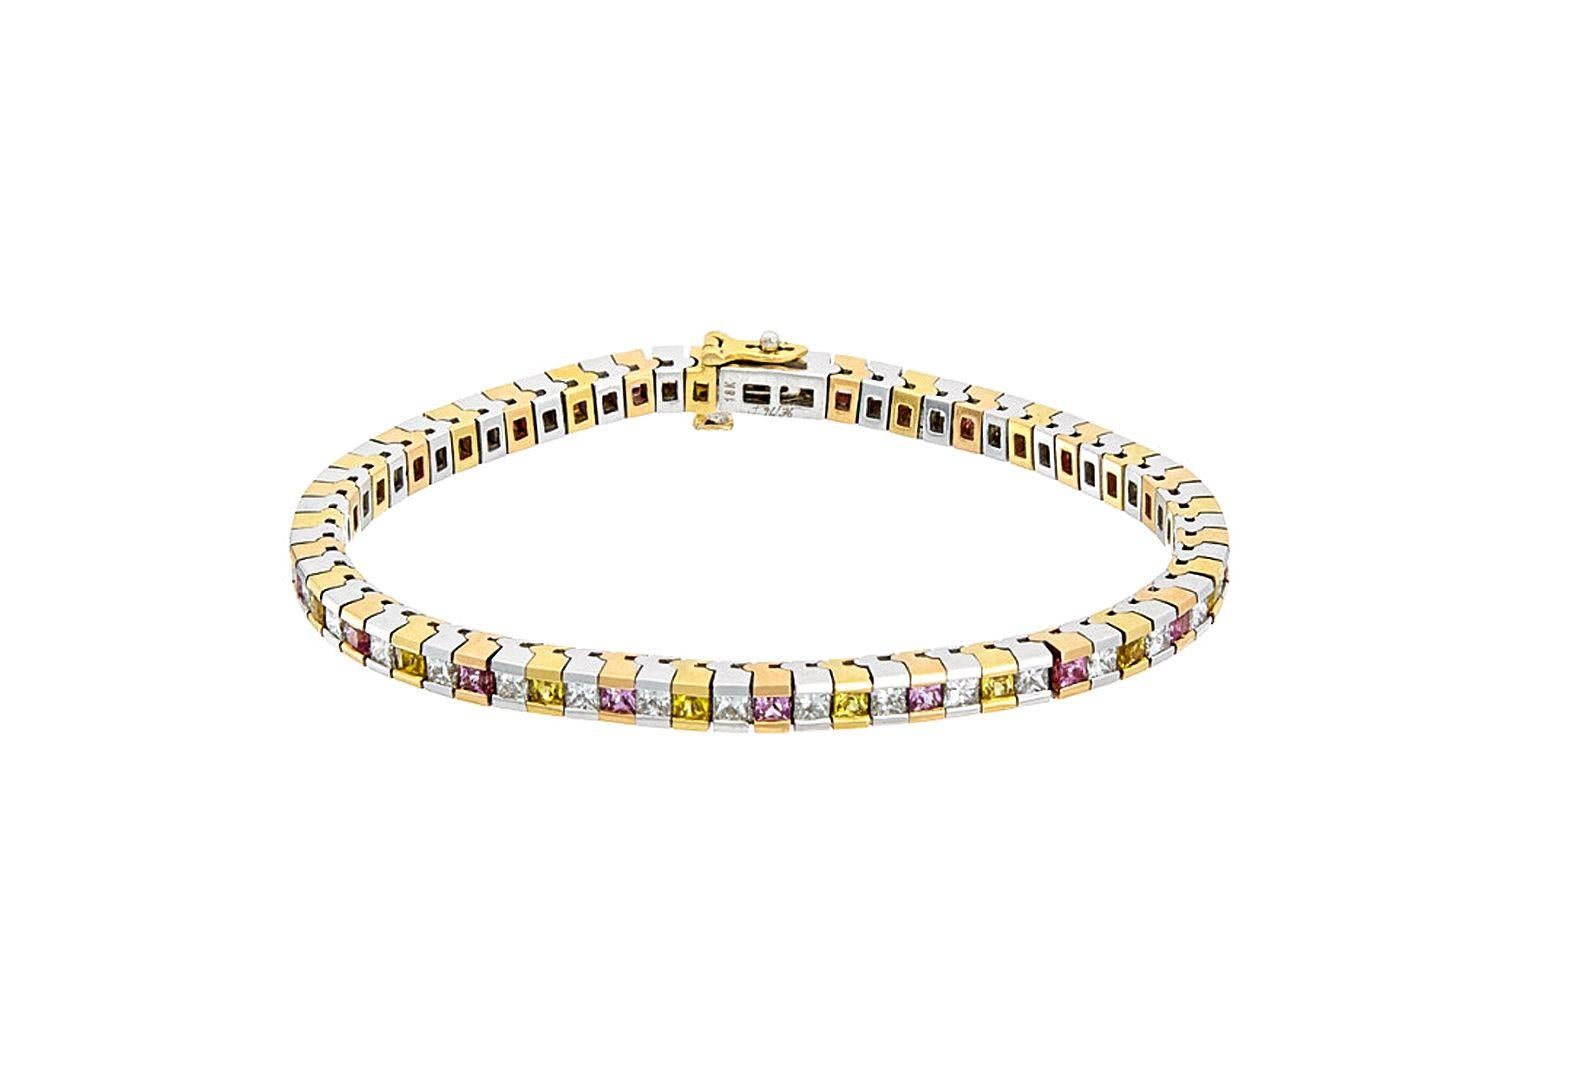 18 kt white and yellow gold articulated bracelet adorned with 4.84 cts tw of pink and yellow sapphires and 4.43 cts tw of diamonds